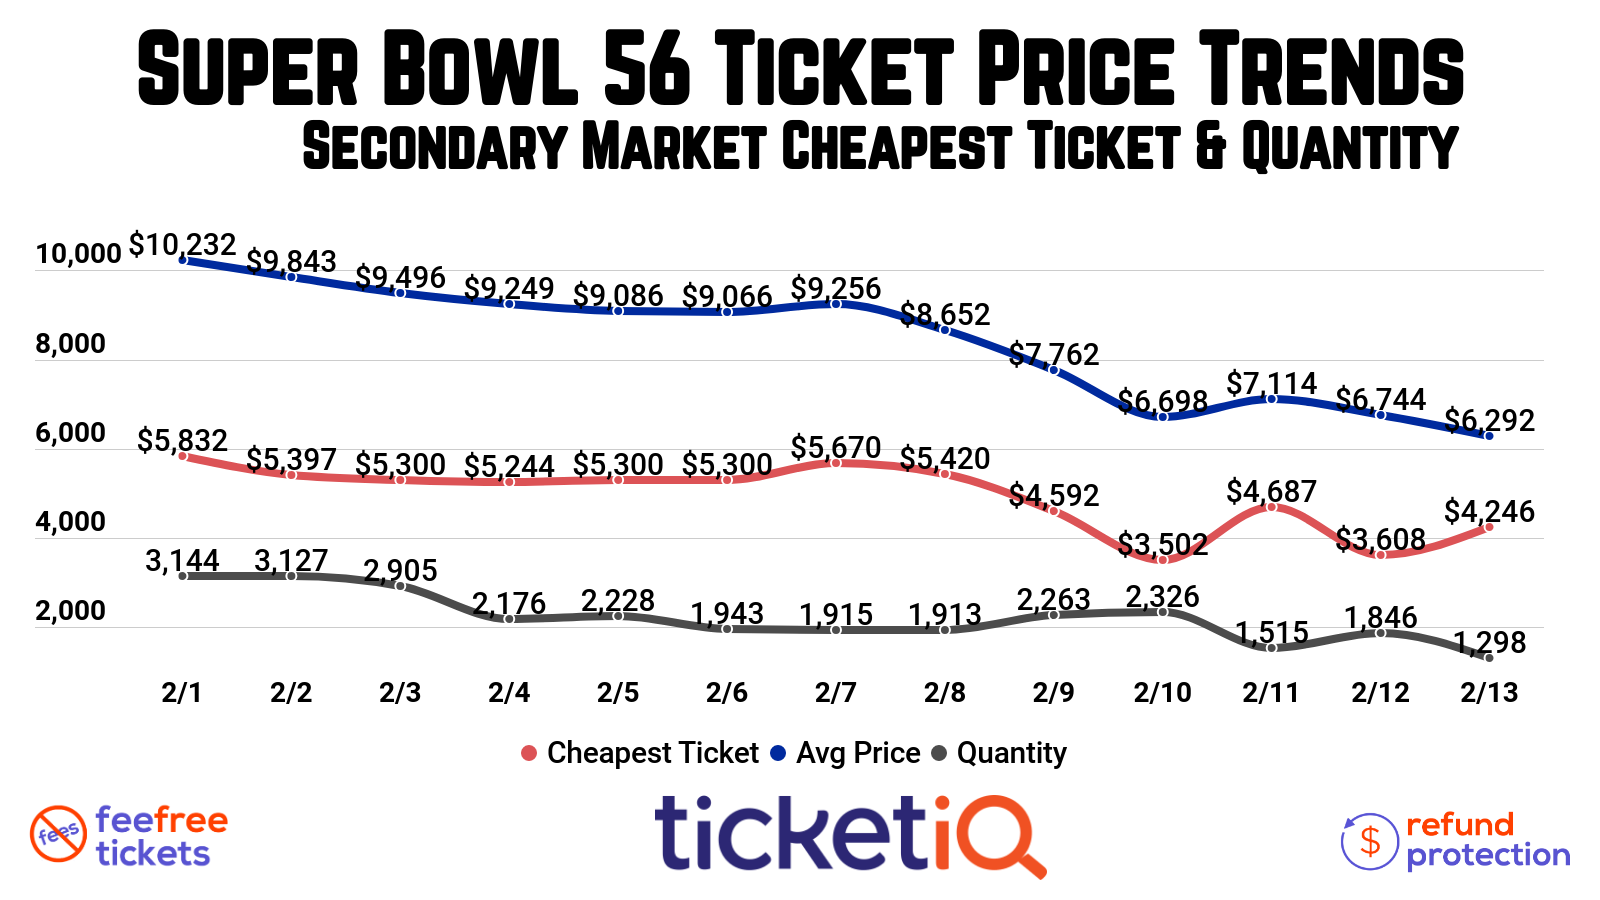 Super Bowl 57 (LVII) Tickets Buying Guide How To Find The Cheapest